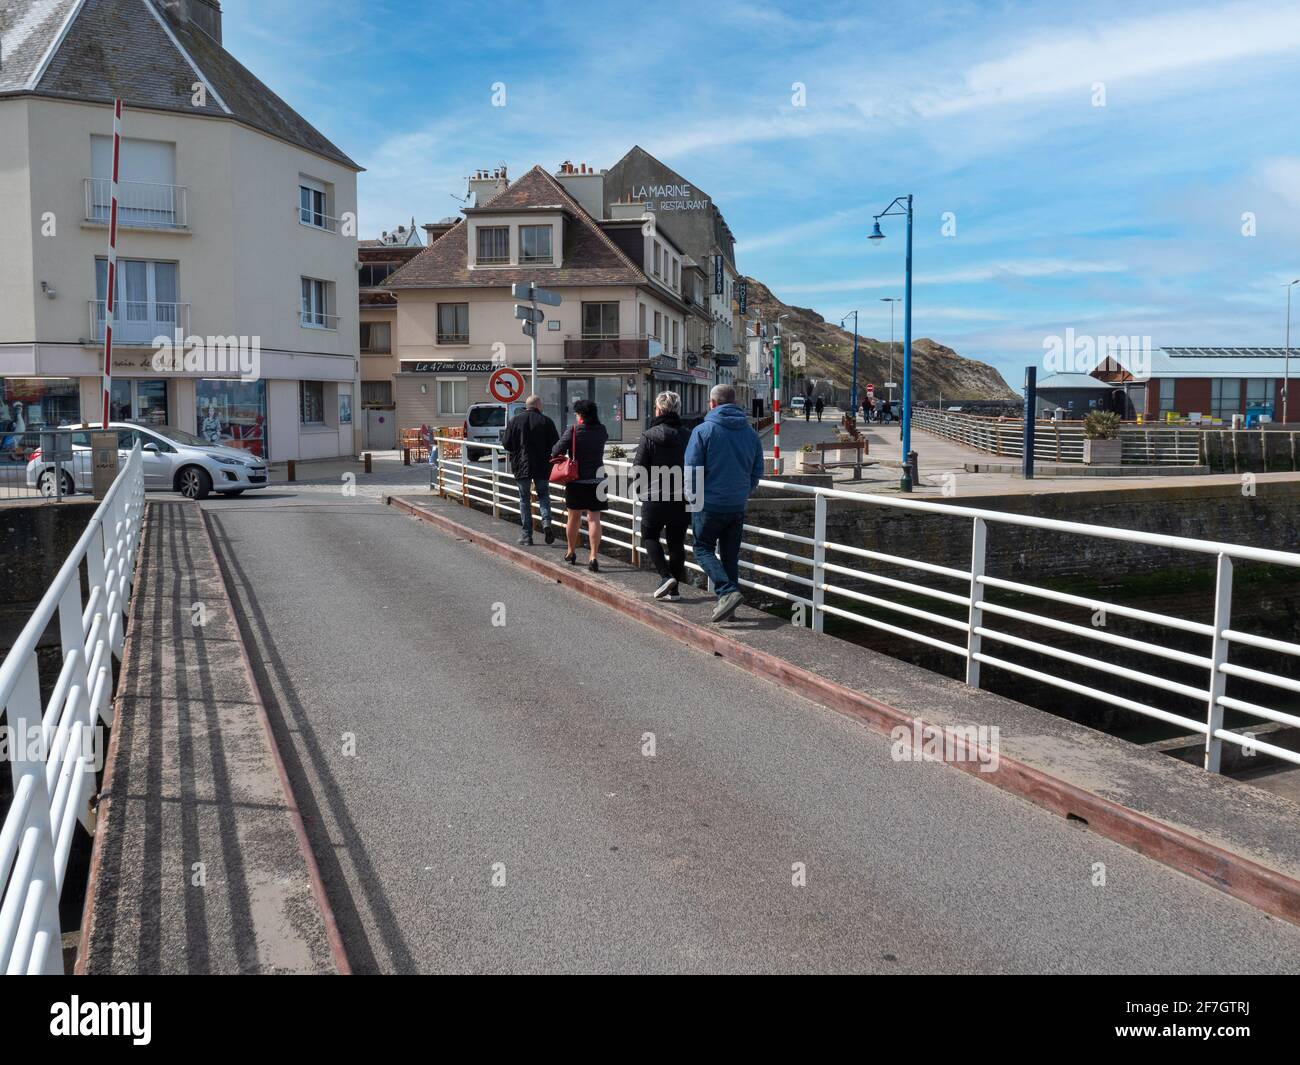 Port-en-Bessin-Huppain, France, March 2021. Tourists walking along the streets in a small town in Normandy - Port-en-Bessin. Stock Photo